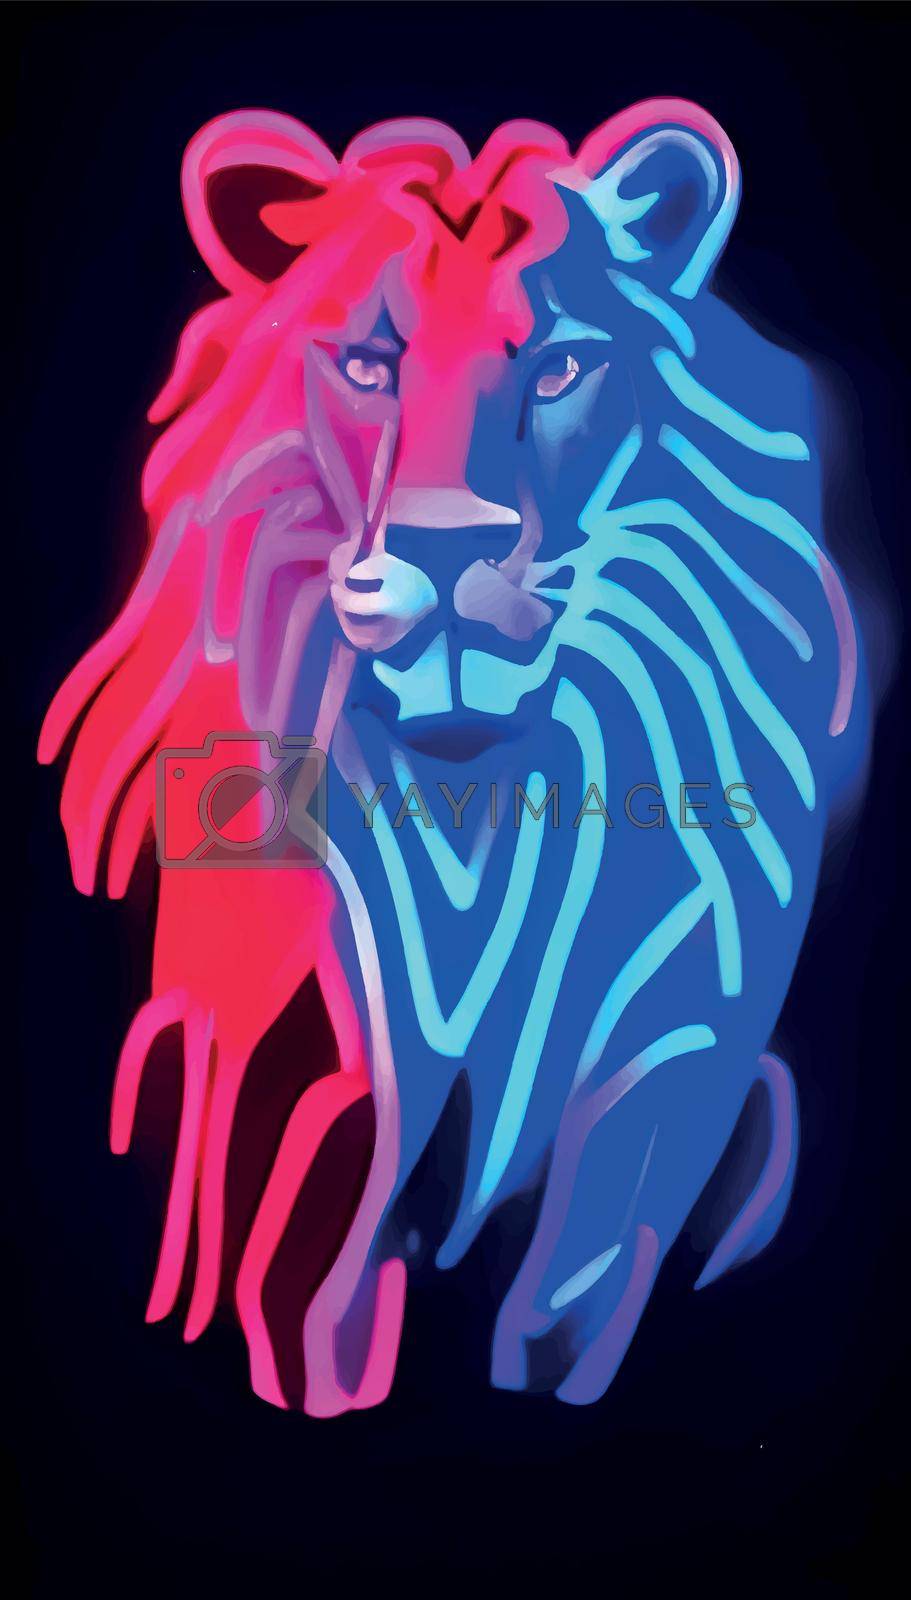 Royalty free image of head of a lion with neon light colors by yilmazsavaskandag